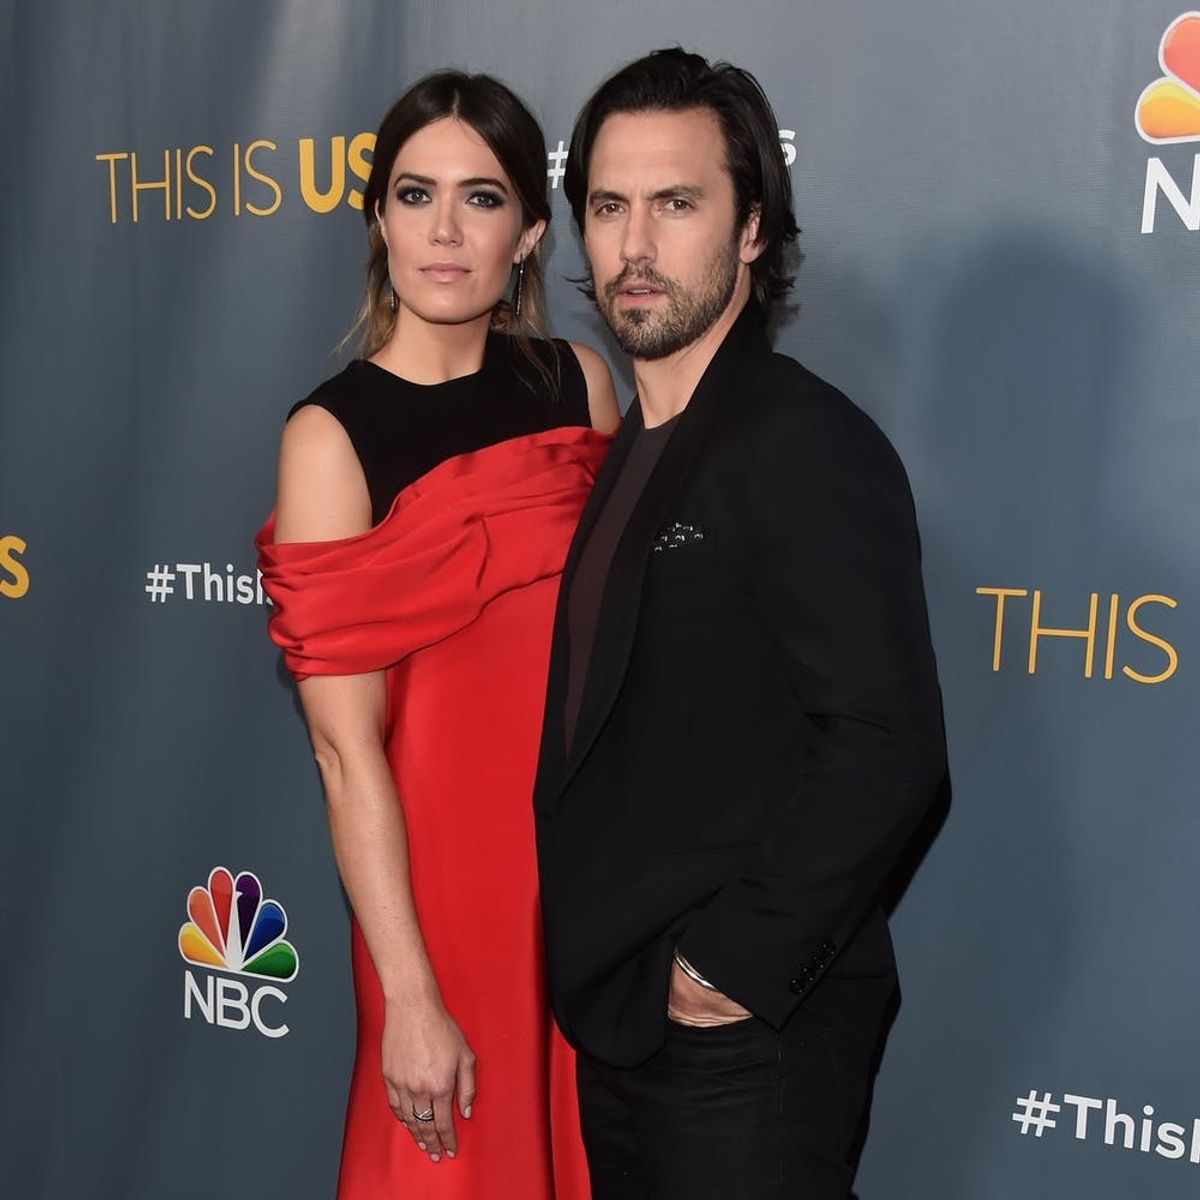 This Is Us Season 2 Will Have Some “Really Big” Moves and “Heavyweight Story Lines”